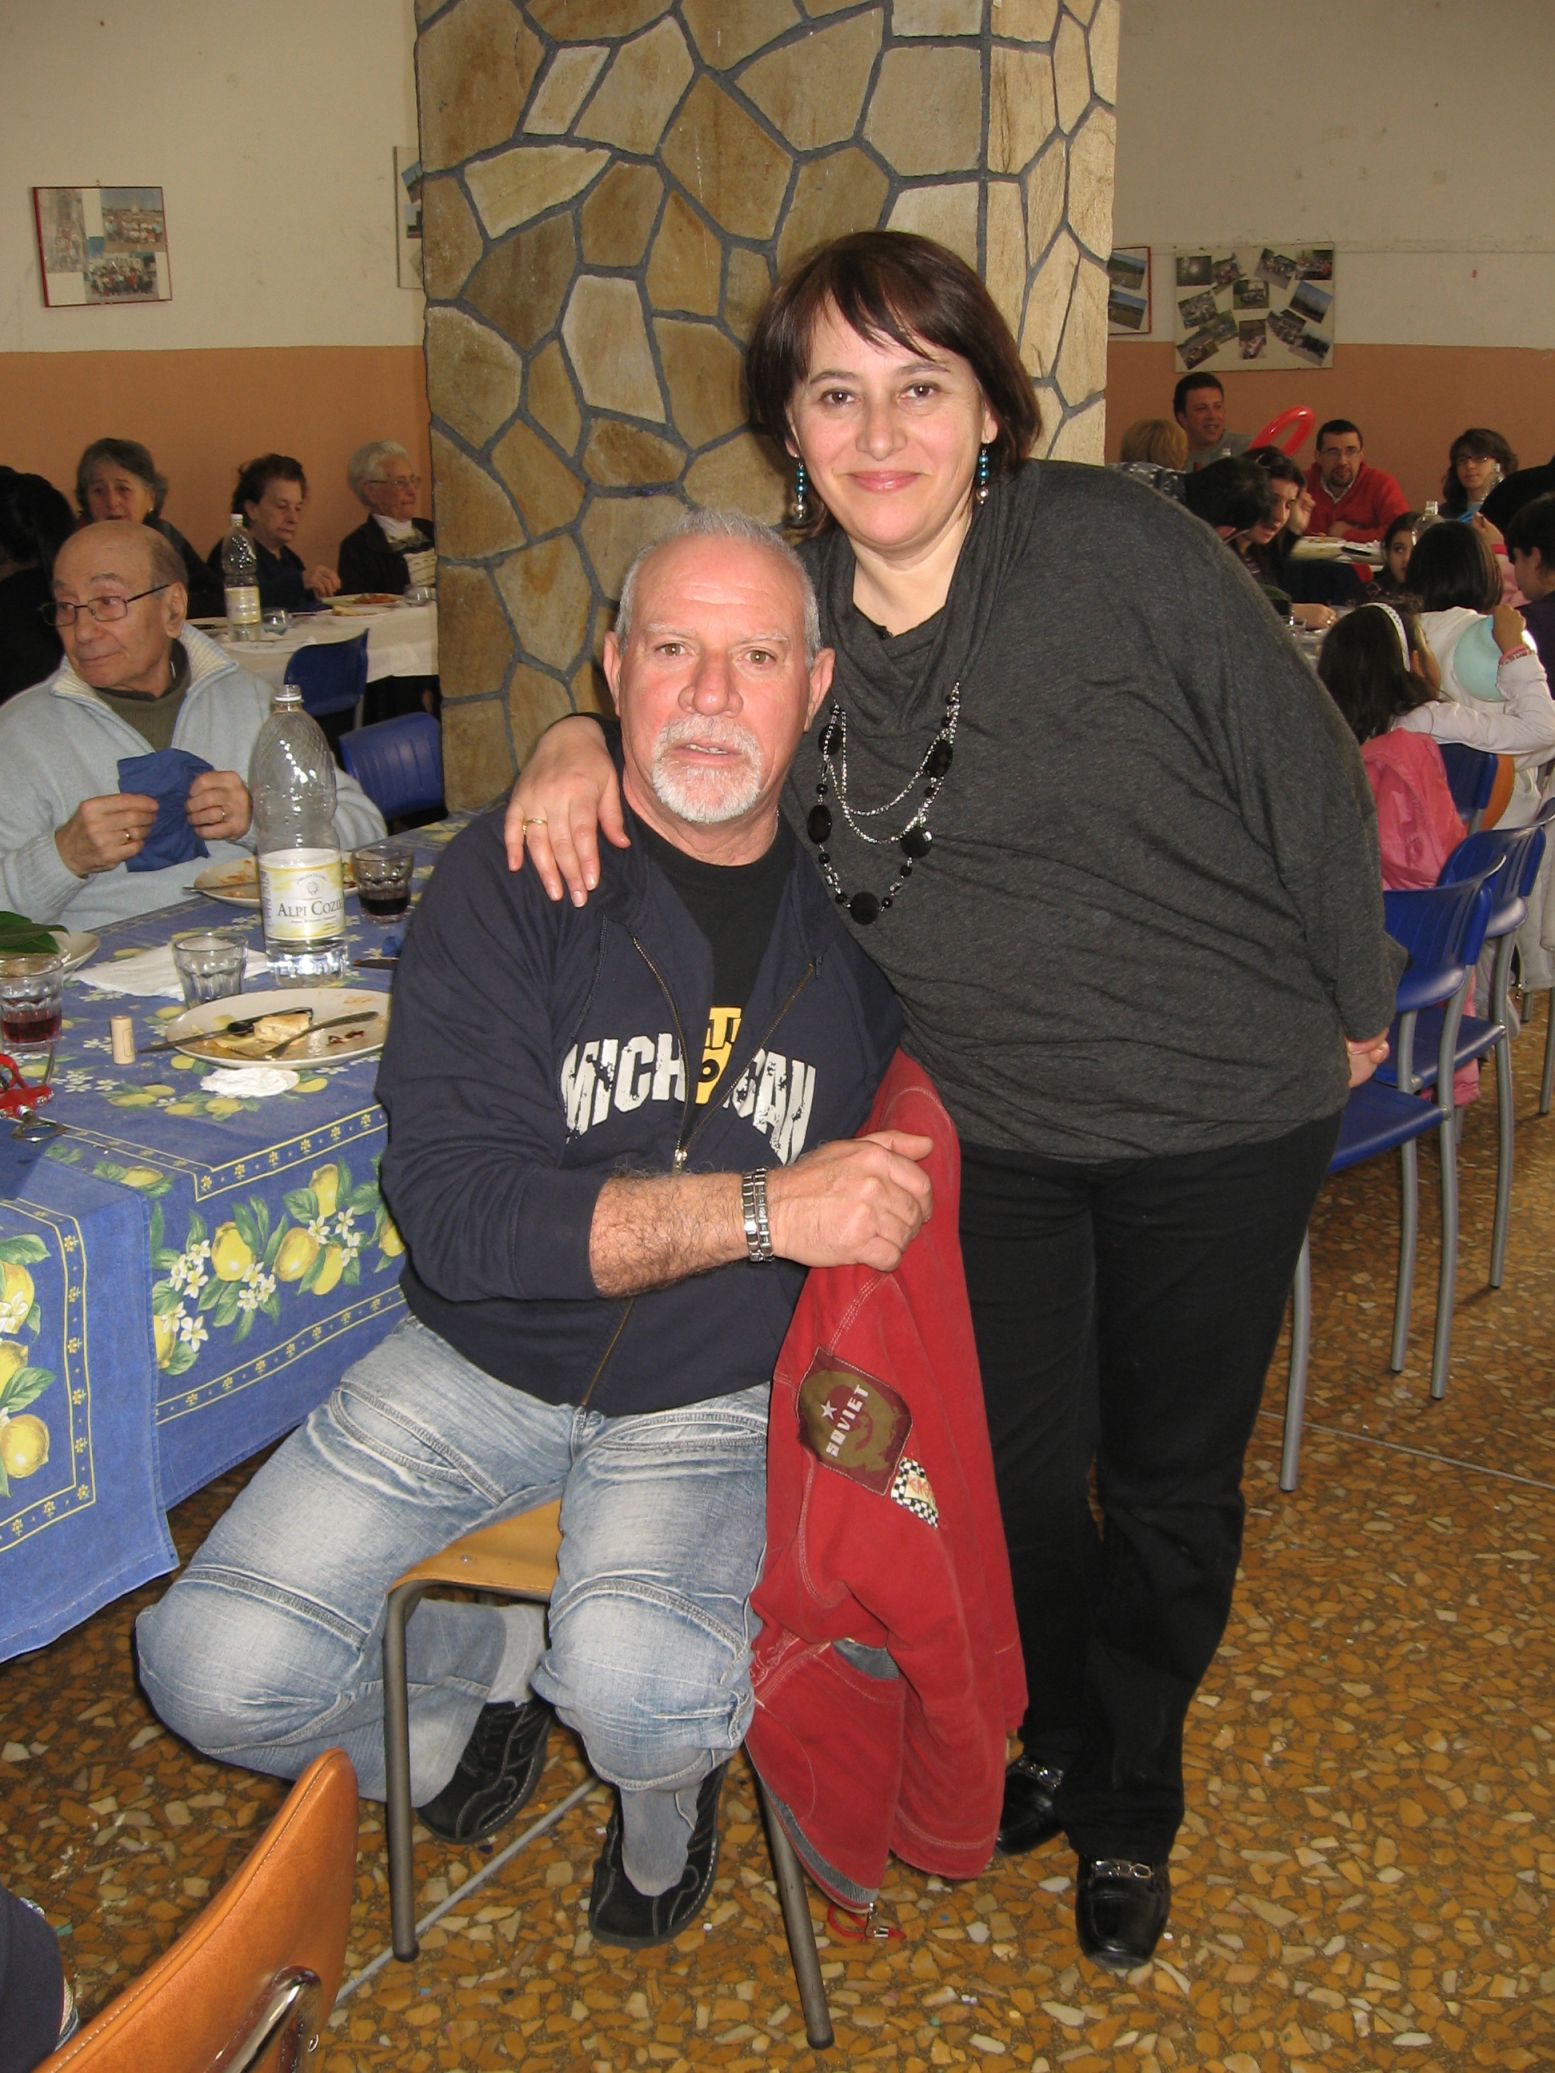 Compleanno-2010-02-07--13.54.02